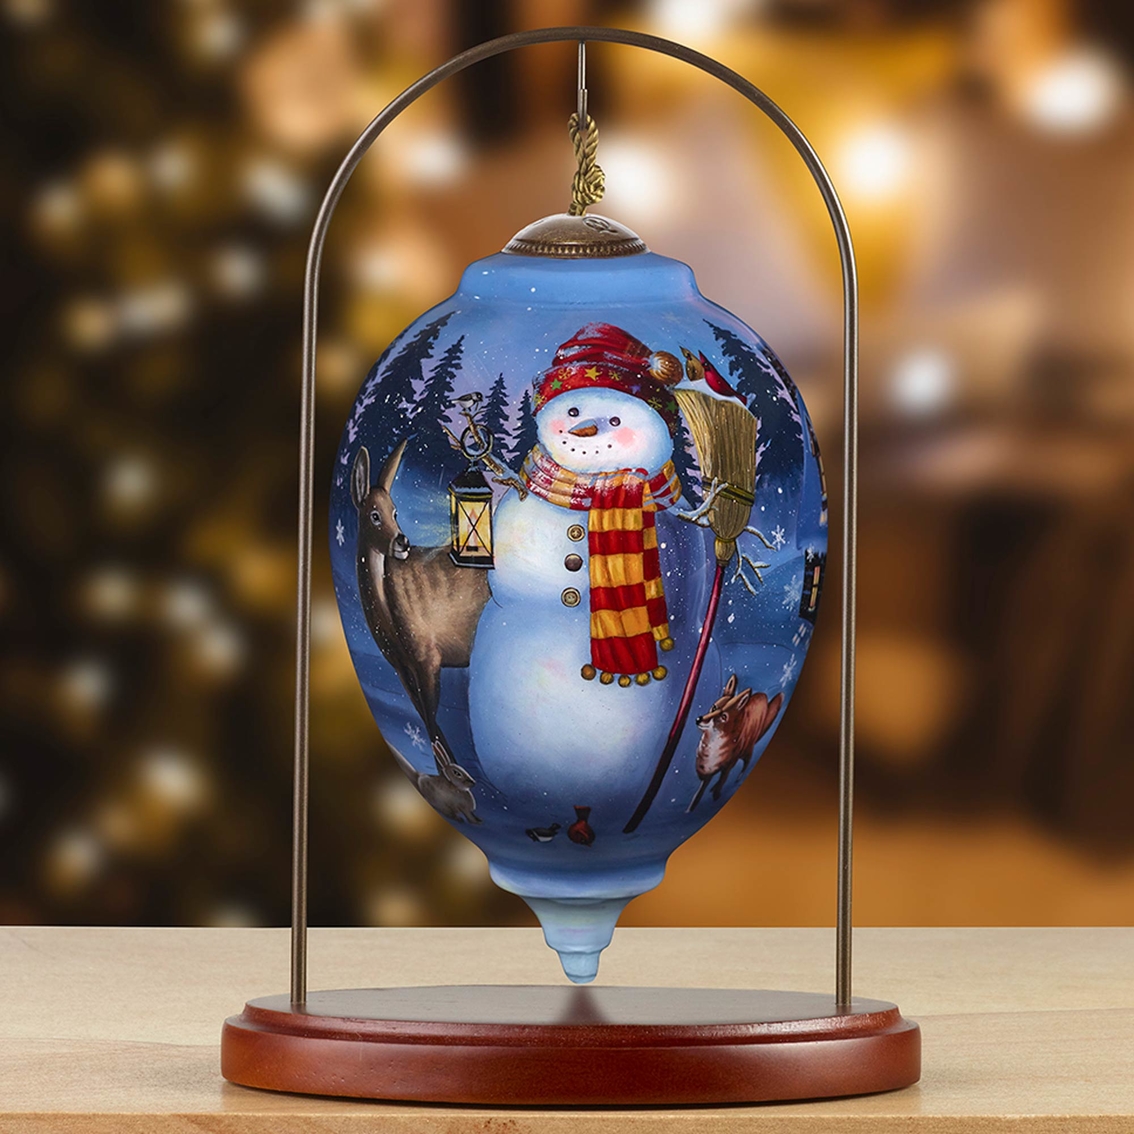 Precious Moments Limited Woodland Winter Friends Ornament - Image 3 of 3